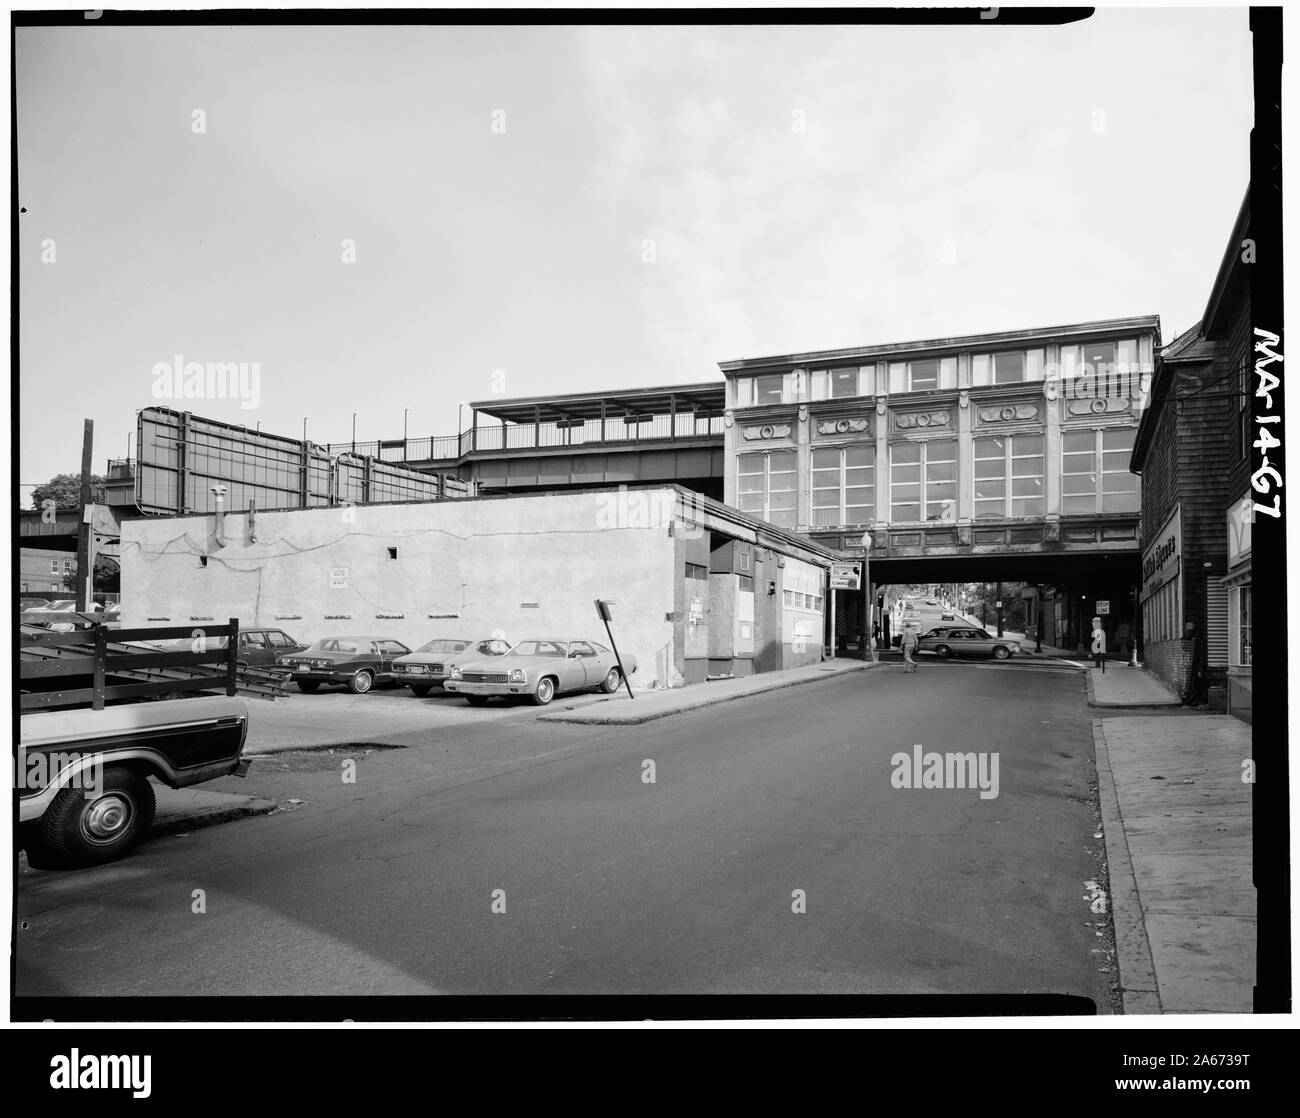 1982 photograph of Green Street station from the street belowOriginal caption:  West elevation Green Street station - looking East across Washington Street along Green Street. In foreground is the reconstructed version of the intermediate level passenger platform which was originaly suspended from the elevated structure. - Boston Elevated Railway, Elevated Mainline, Washington Street, Boston, Suffolk County, MA; Stock Photo